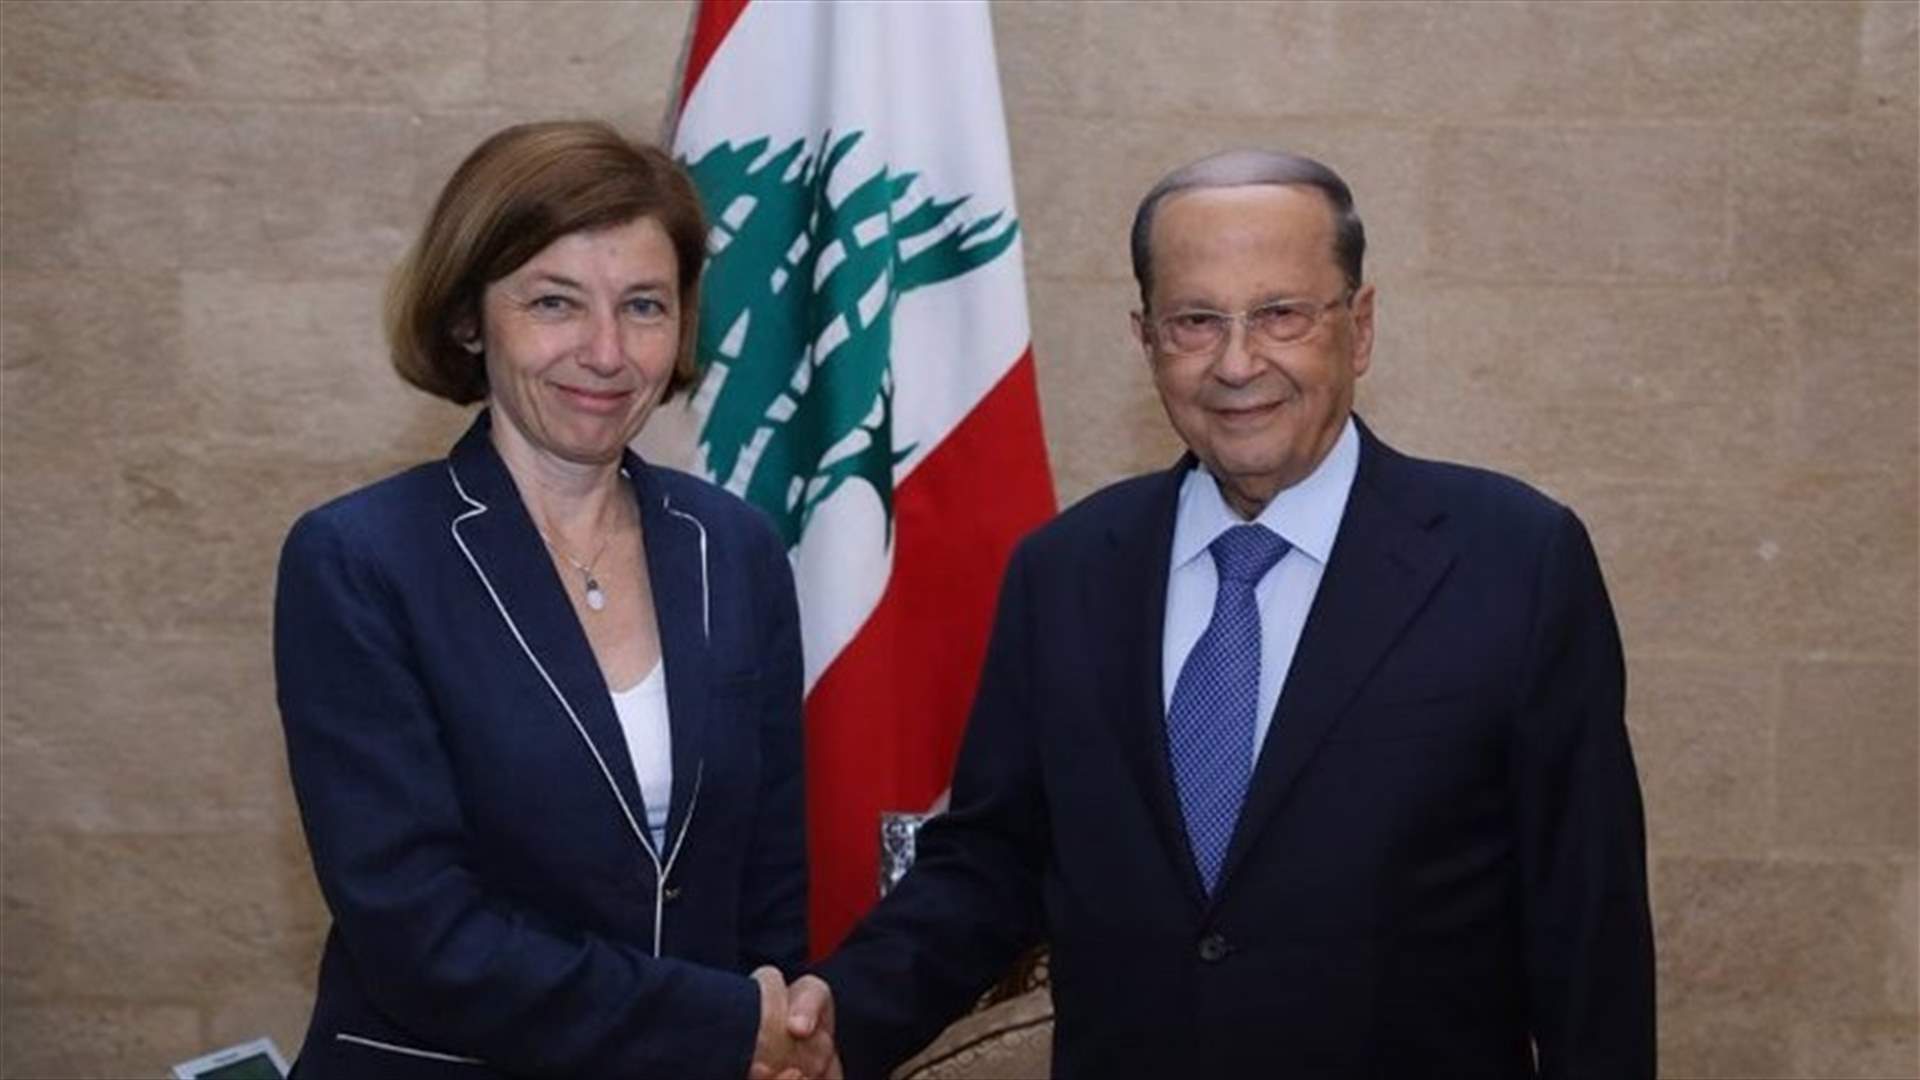 Aoun says Lebanon committed to resolution 1701 and return to Syrian refugees